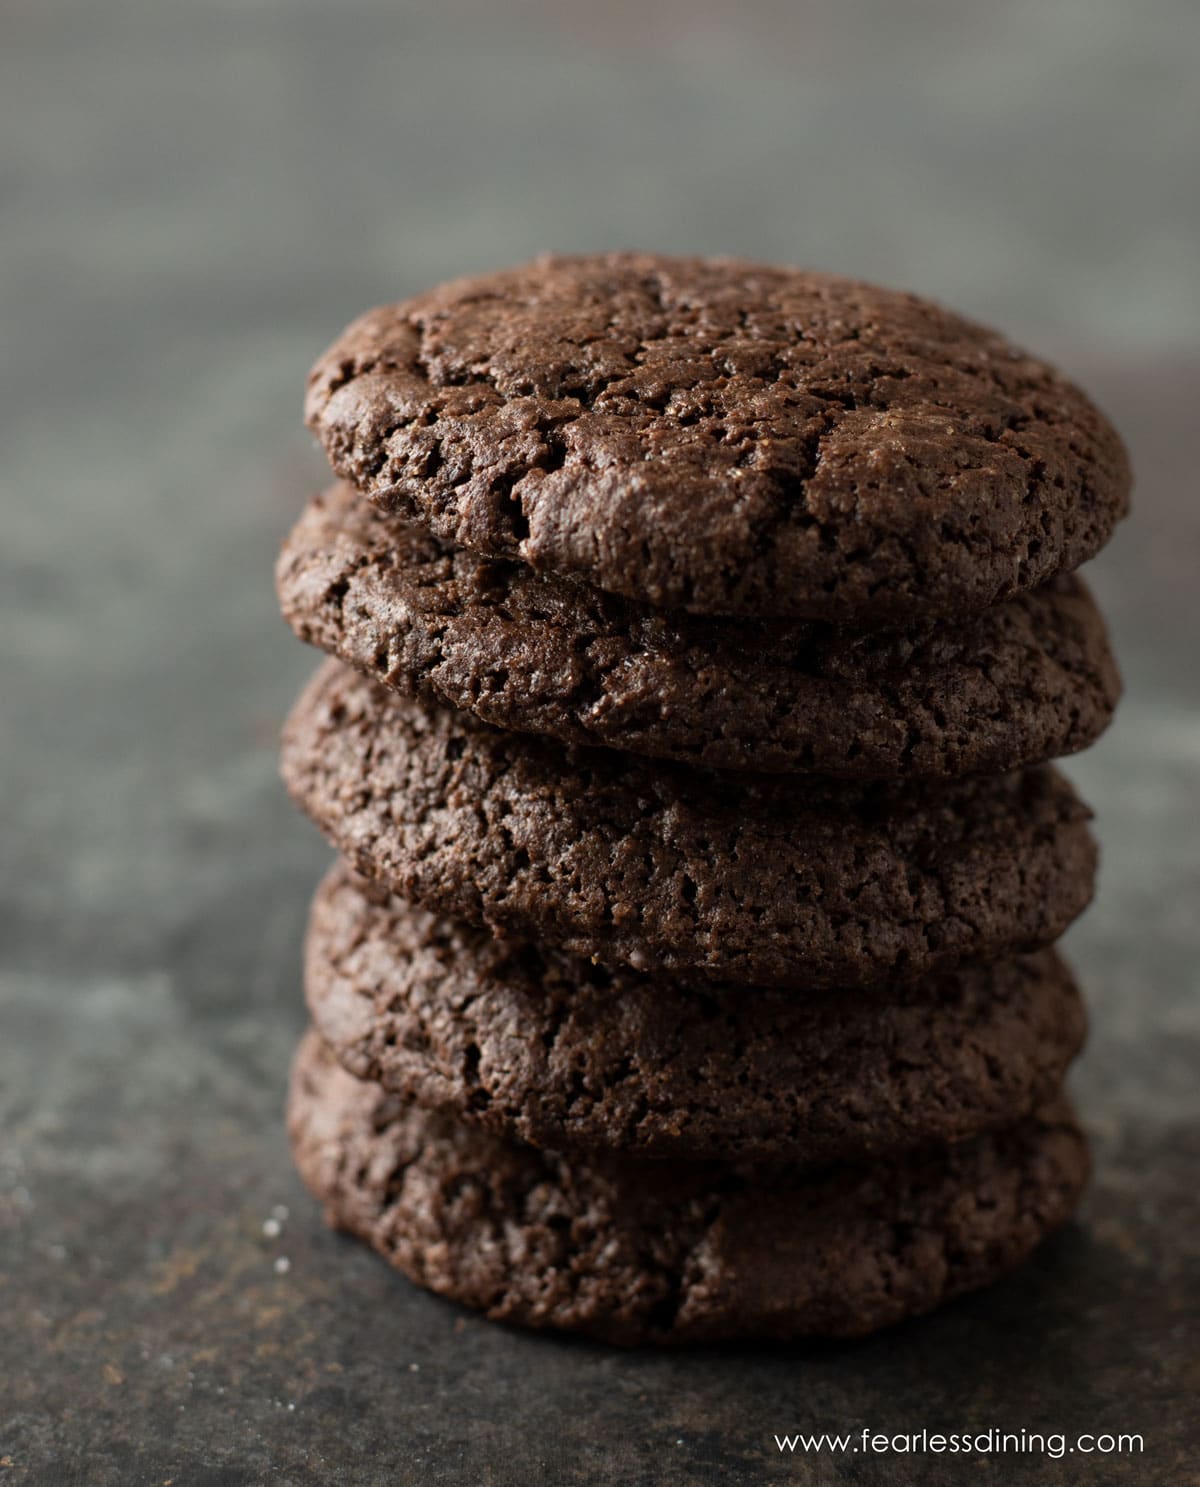 A stack of 5 fudgy gluten free chocolate cookies.